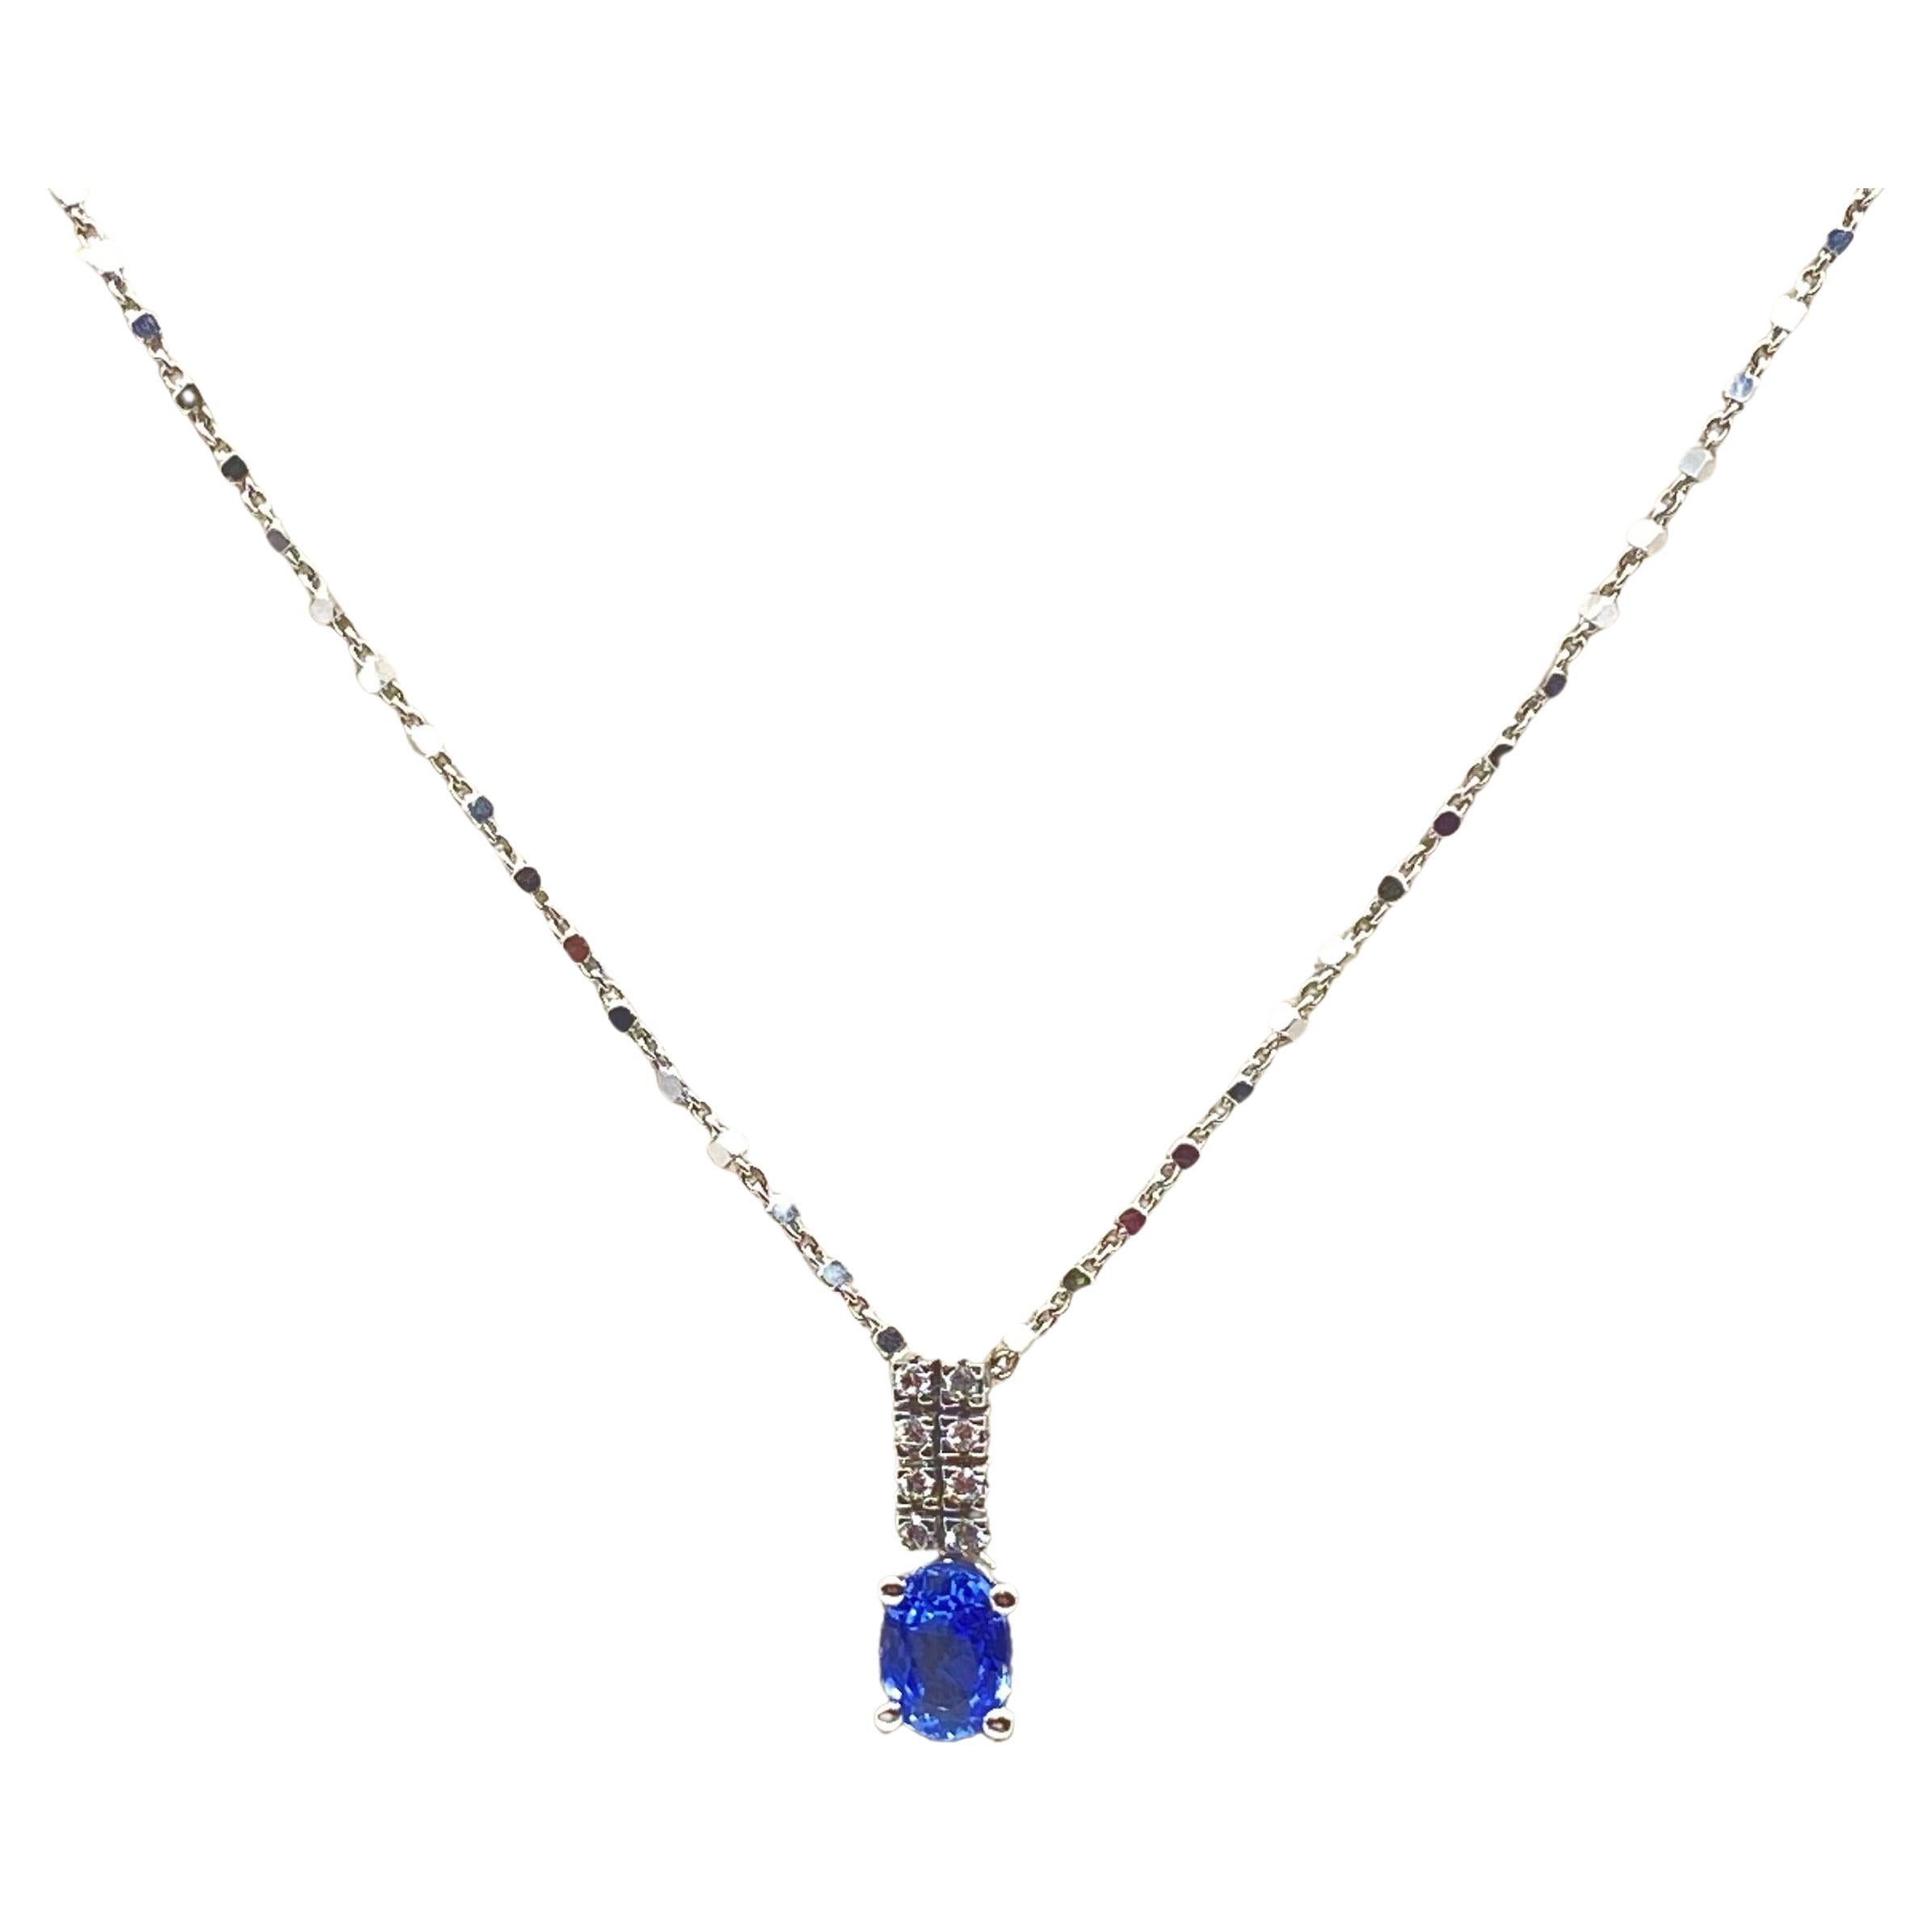 18K White Gold Diamond and Sapphire Necklace